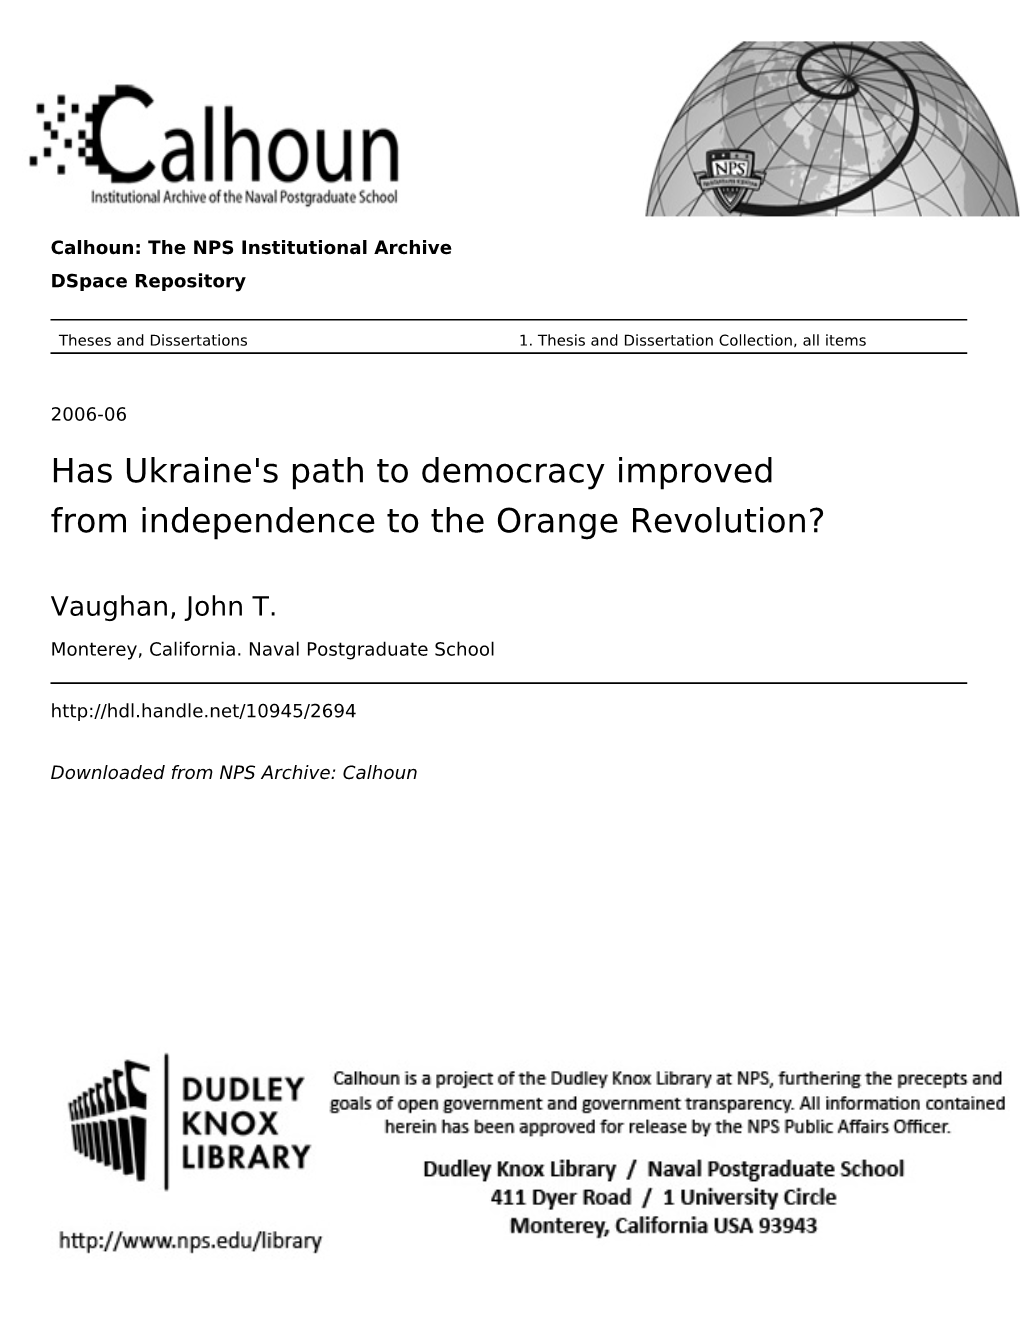 Has Ukraine's Path to Democracy Improved from Independence to the Orange Revolution?